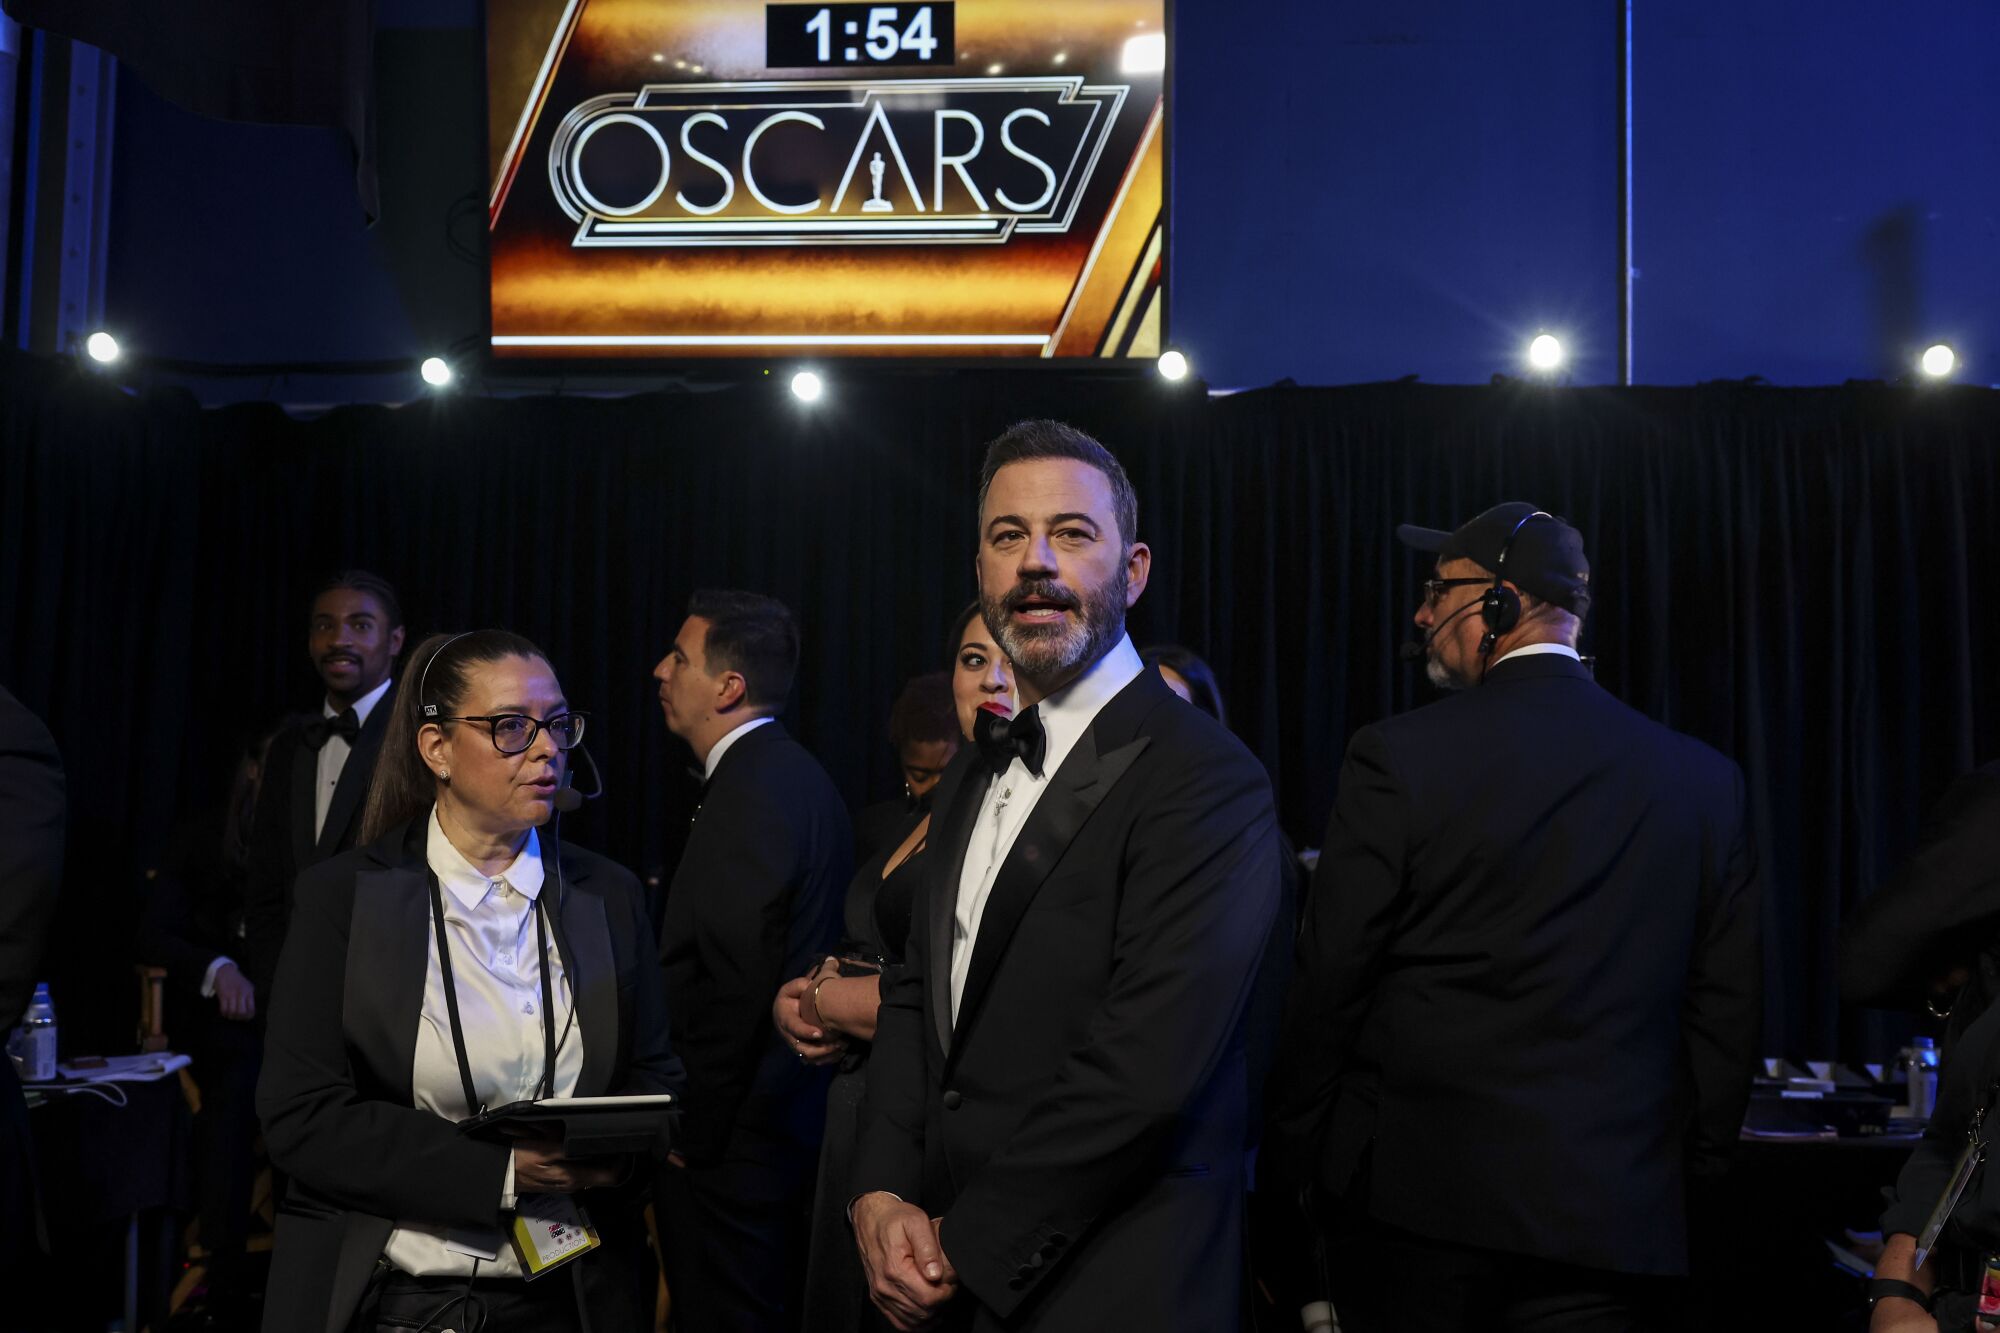 man in tux under Oscars sign stands among crew members